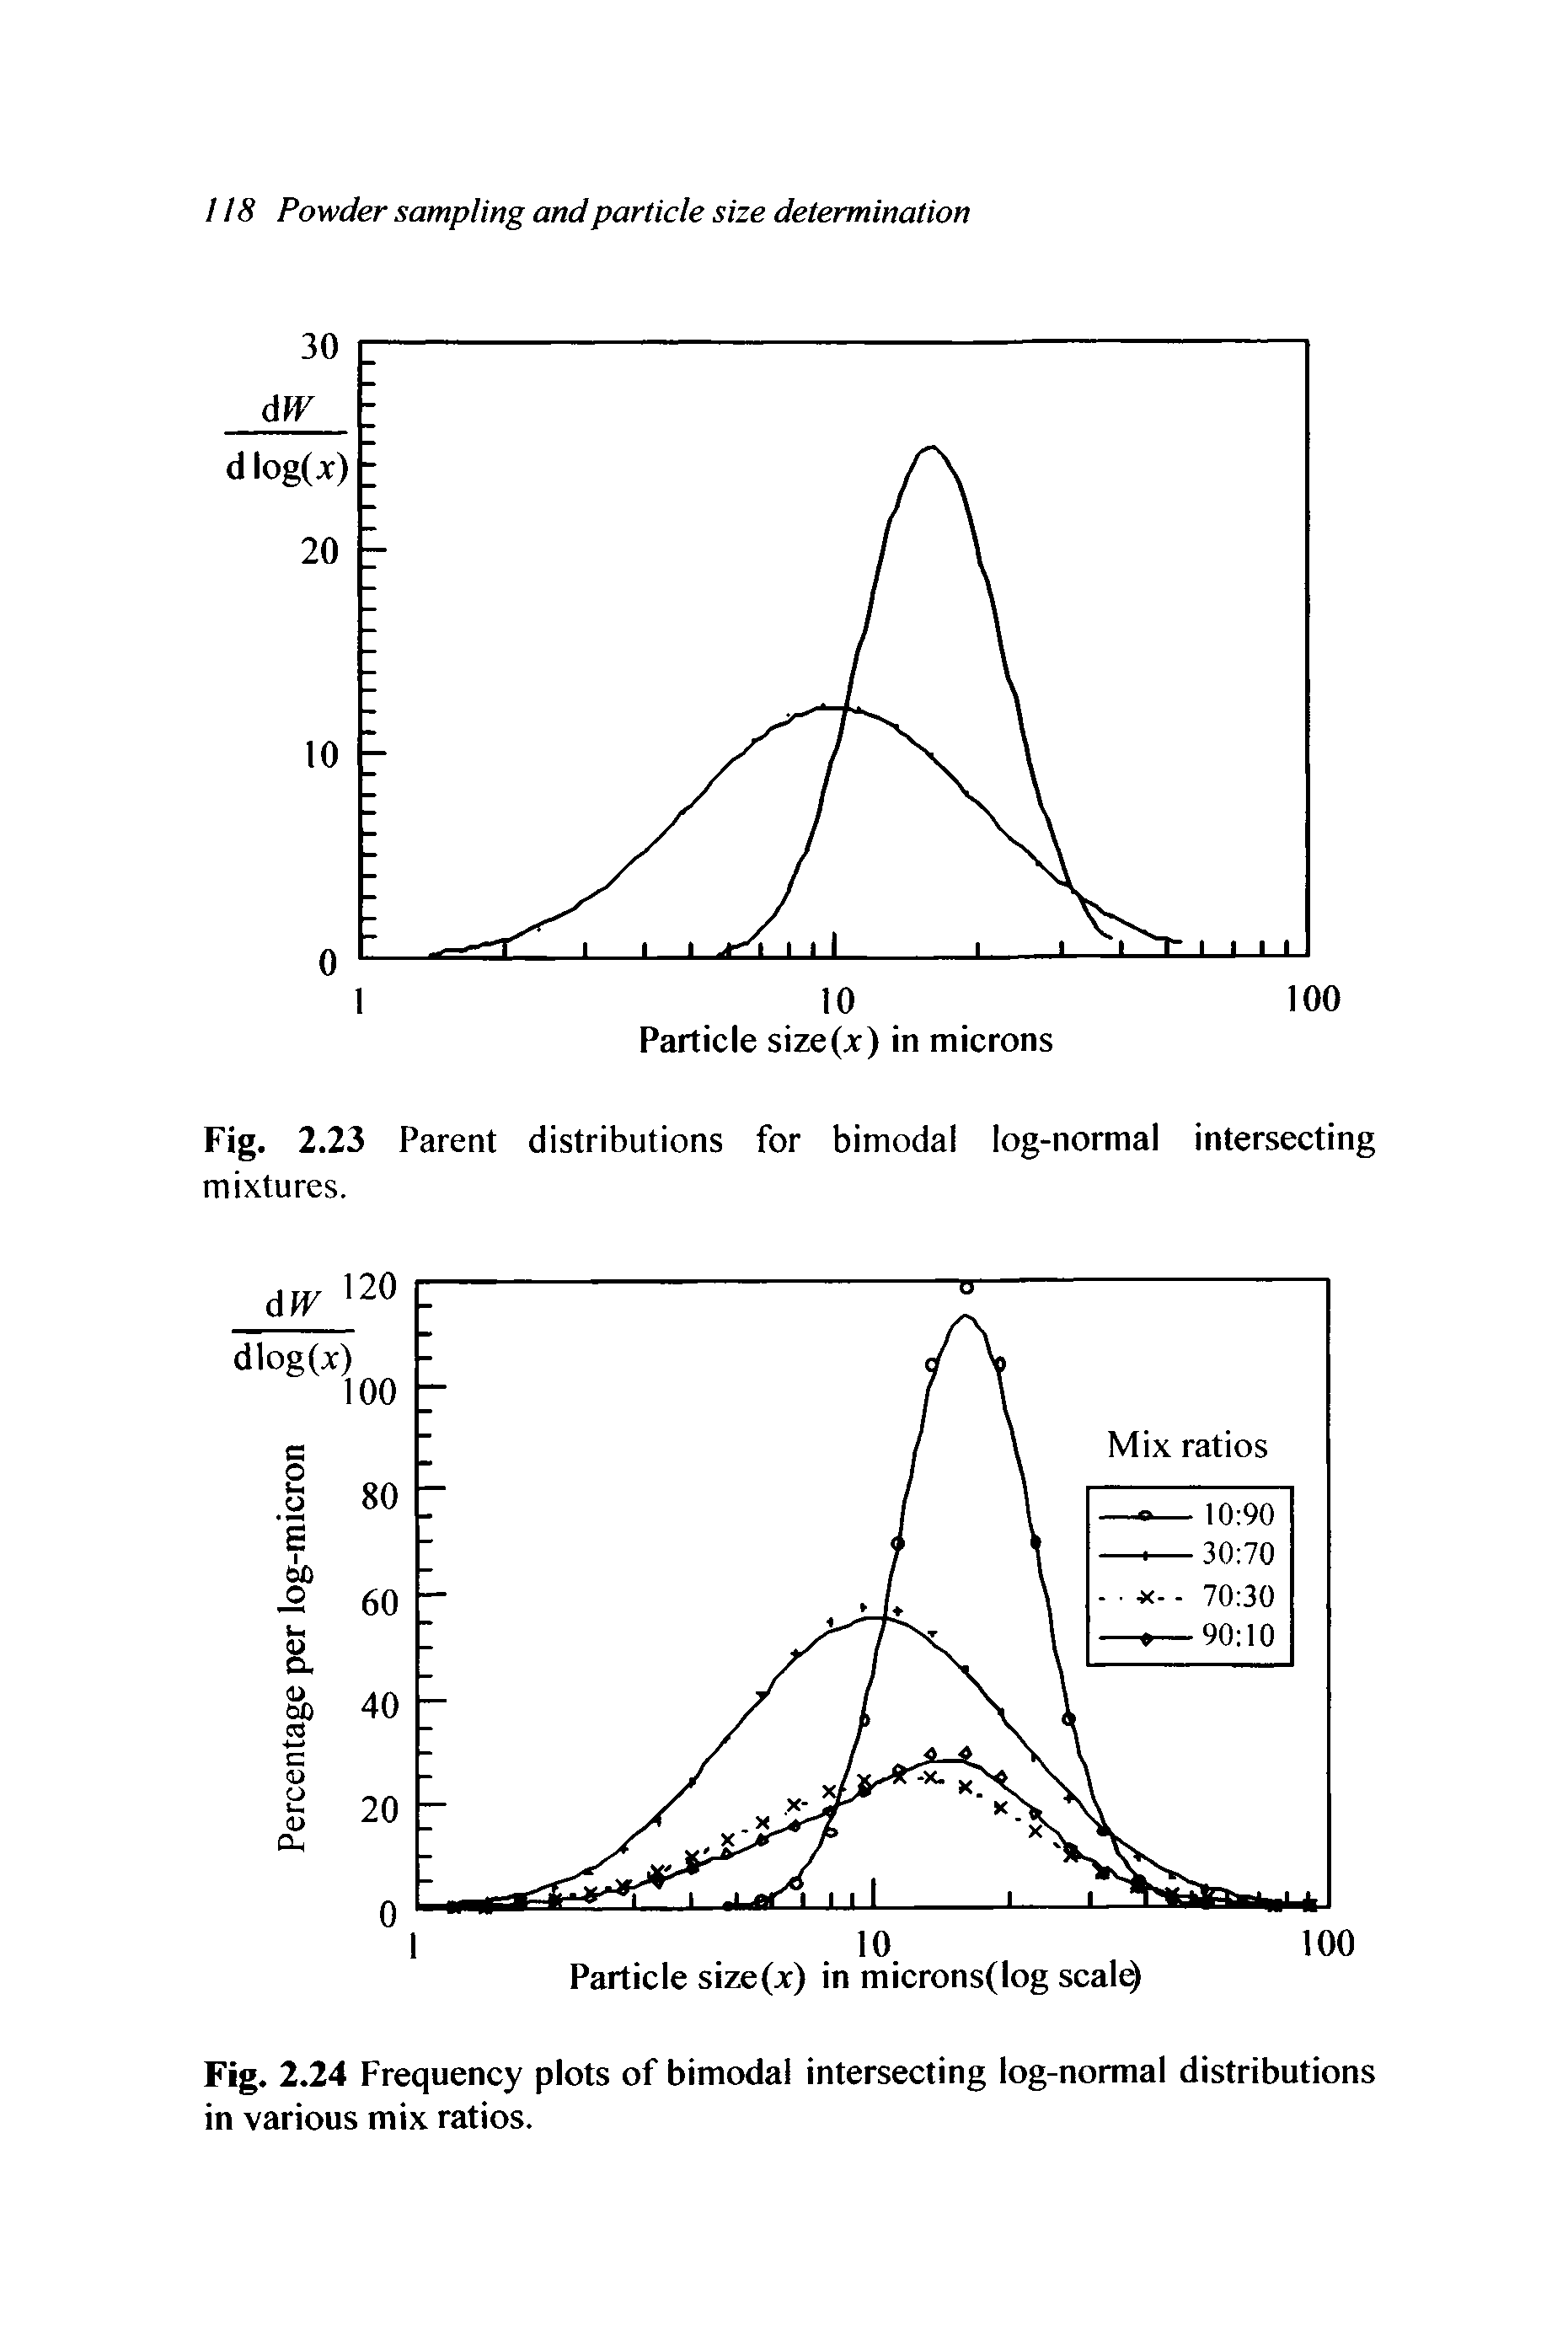 Fig. 2.24 Frequency plots of bimodal intersecting log-normal distributions in various mix ratios.